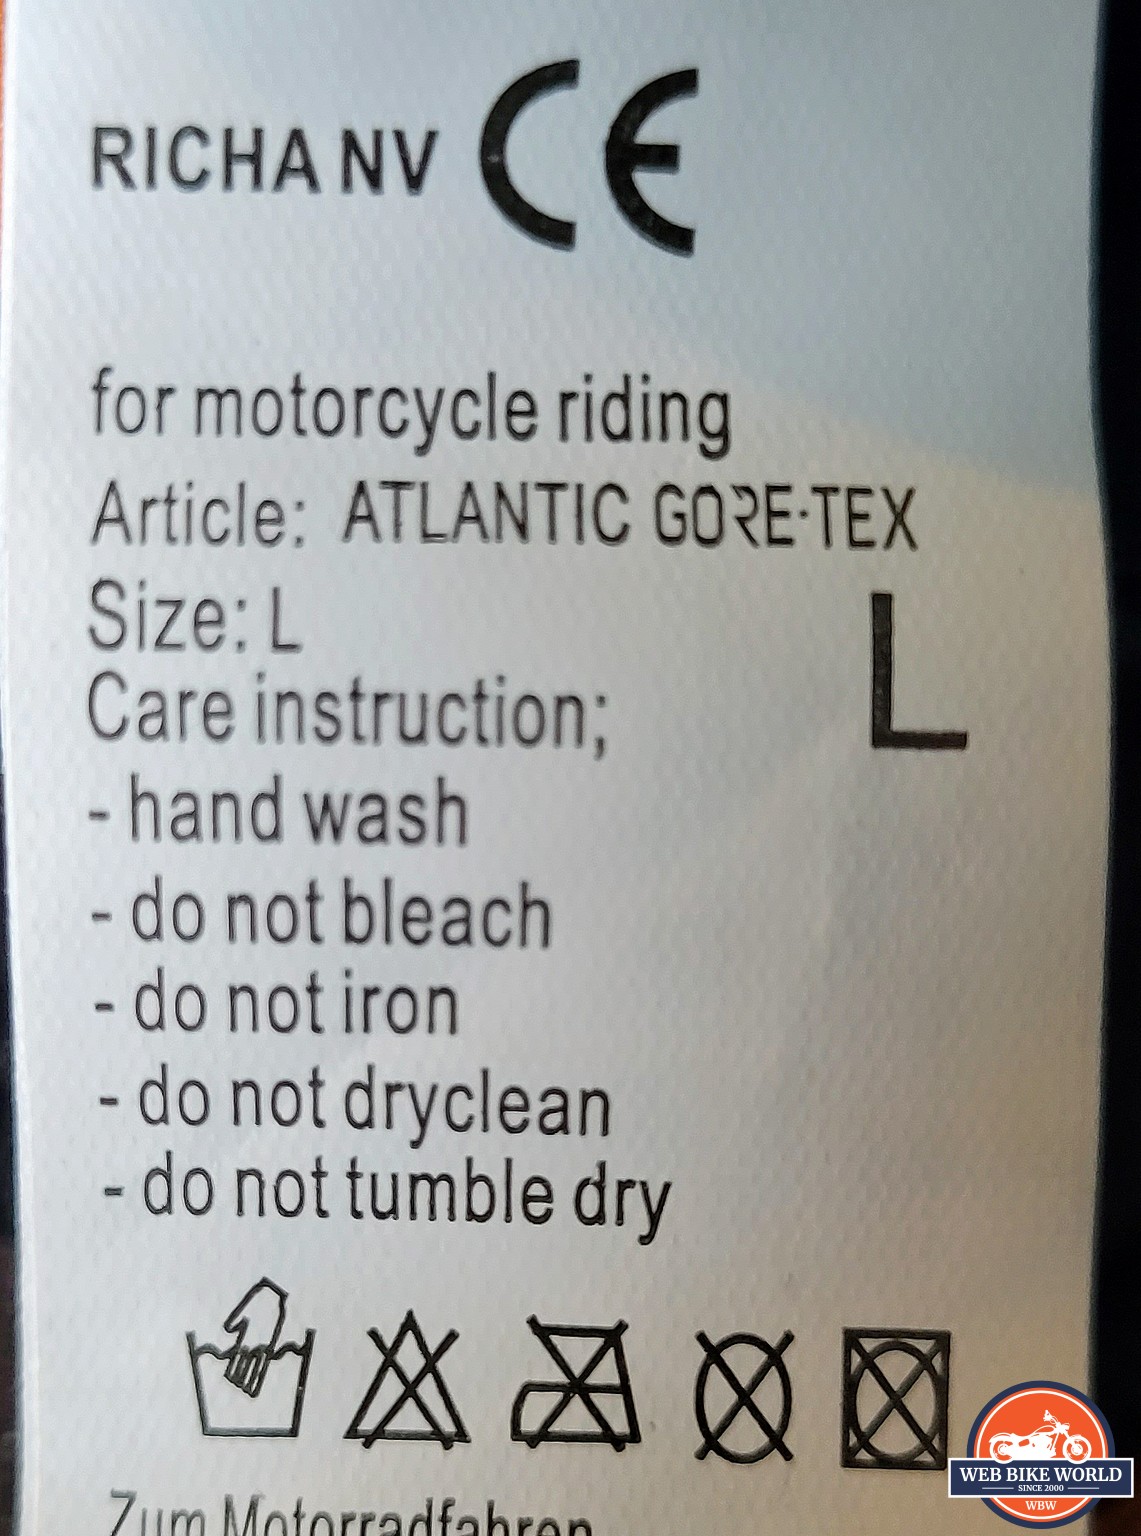 Care instructions tag on the glove